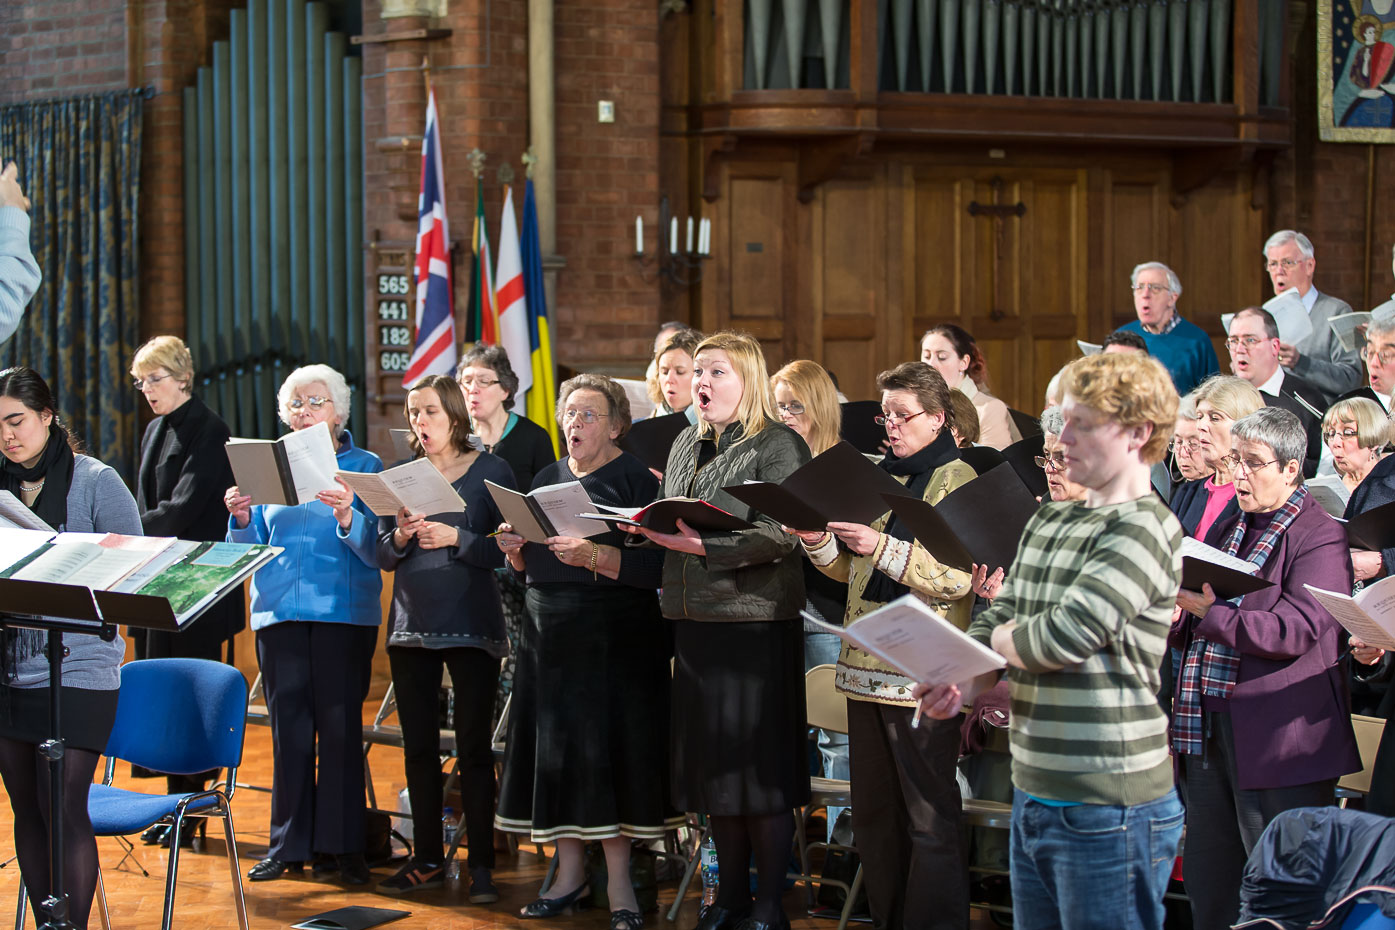 Rehearsal for the 'I Heard a Voice from Heaven' concert, March 2013< ><>Soloists <>  Catherine Backhouse (alto) and Thomas Elwin (tenor)< ><>Front Row <> Glynis Bailey